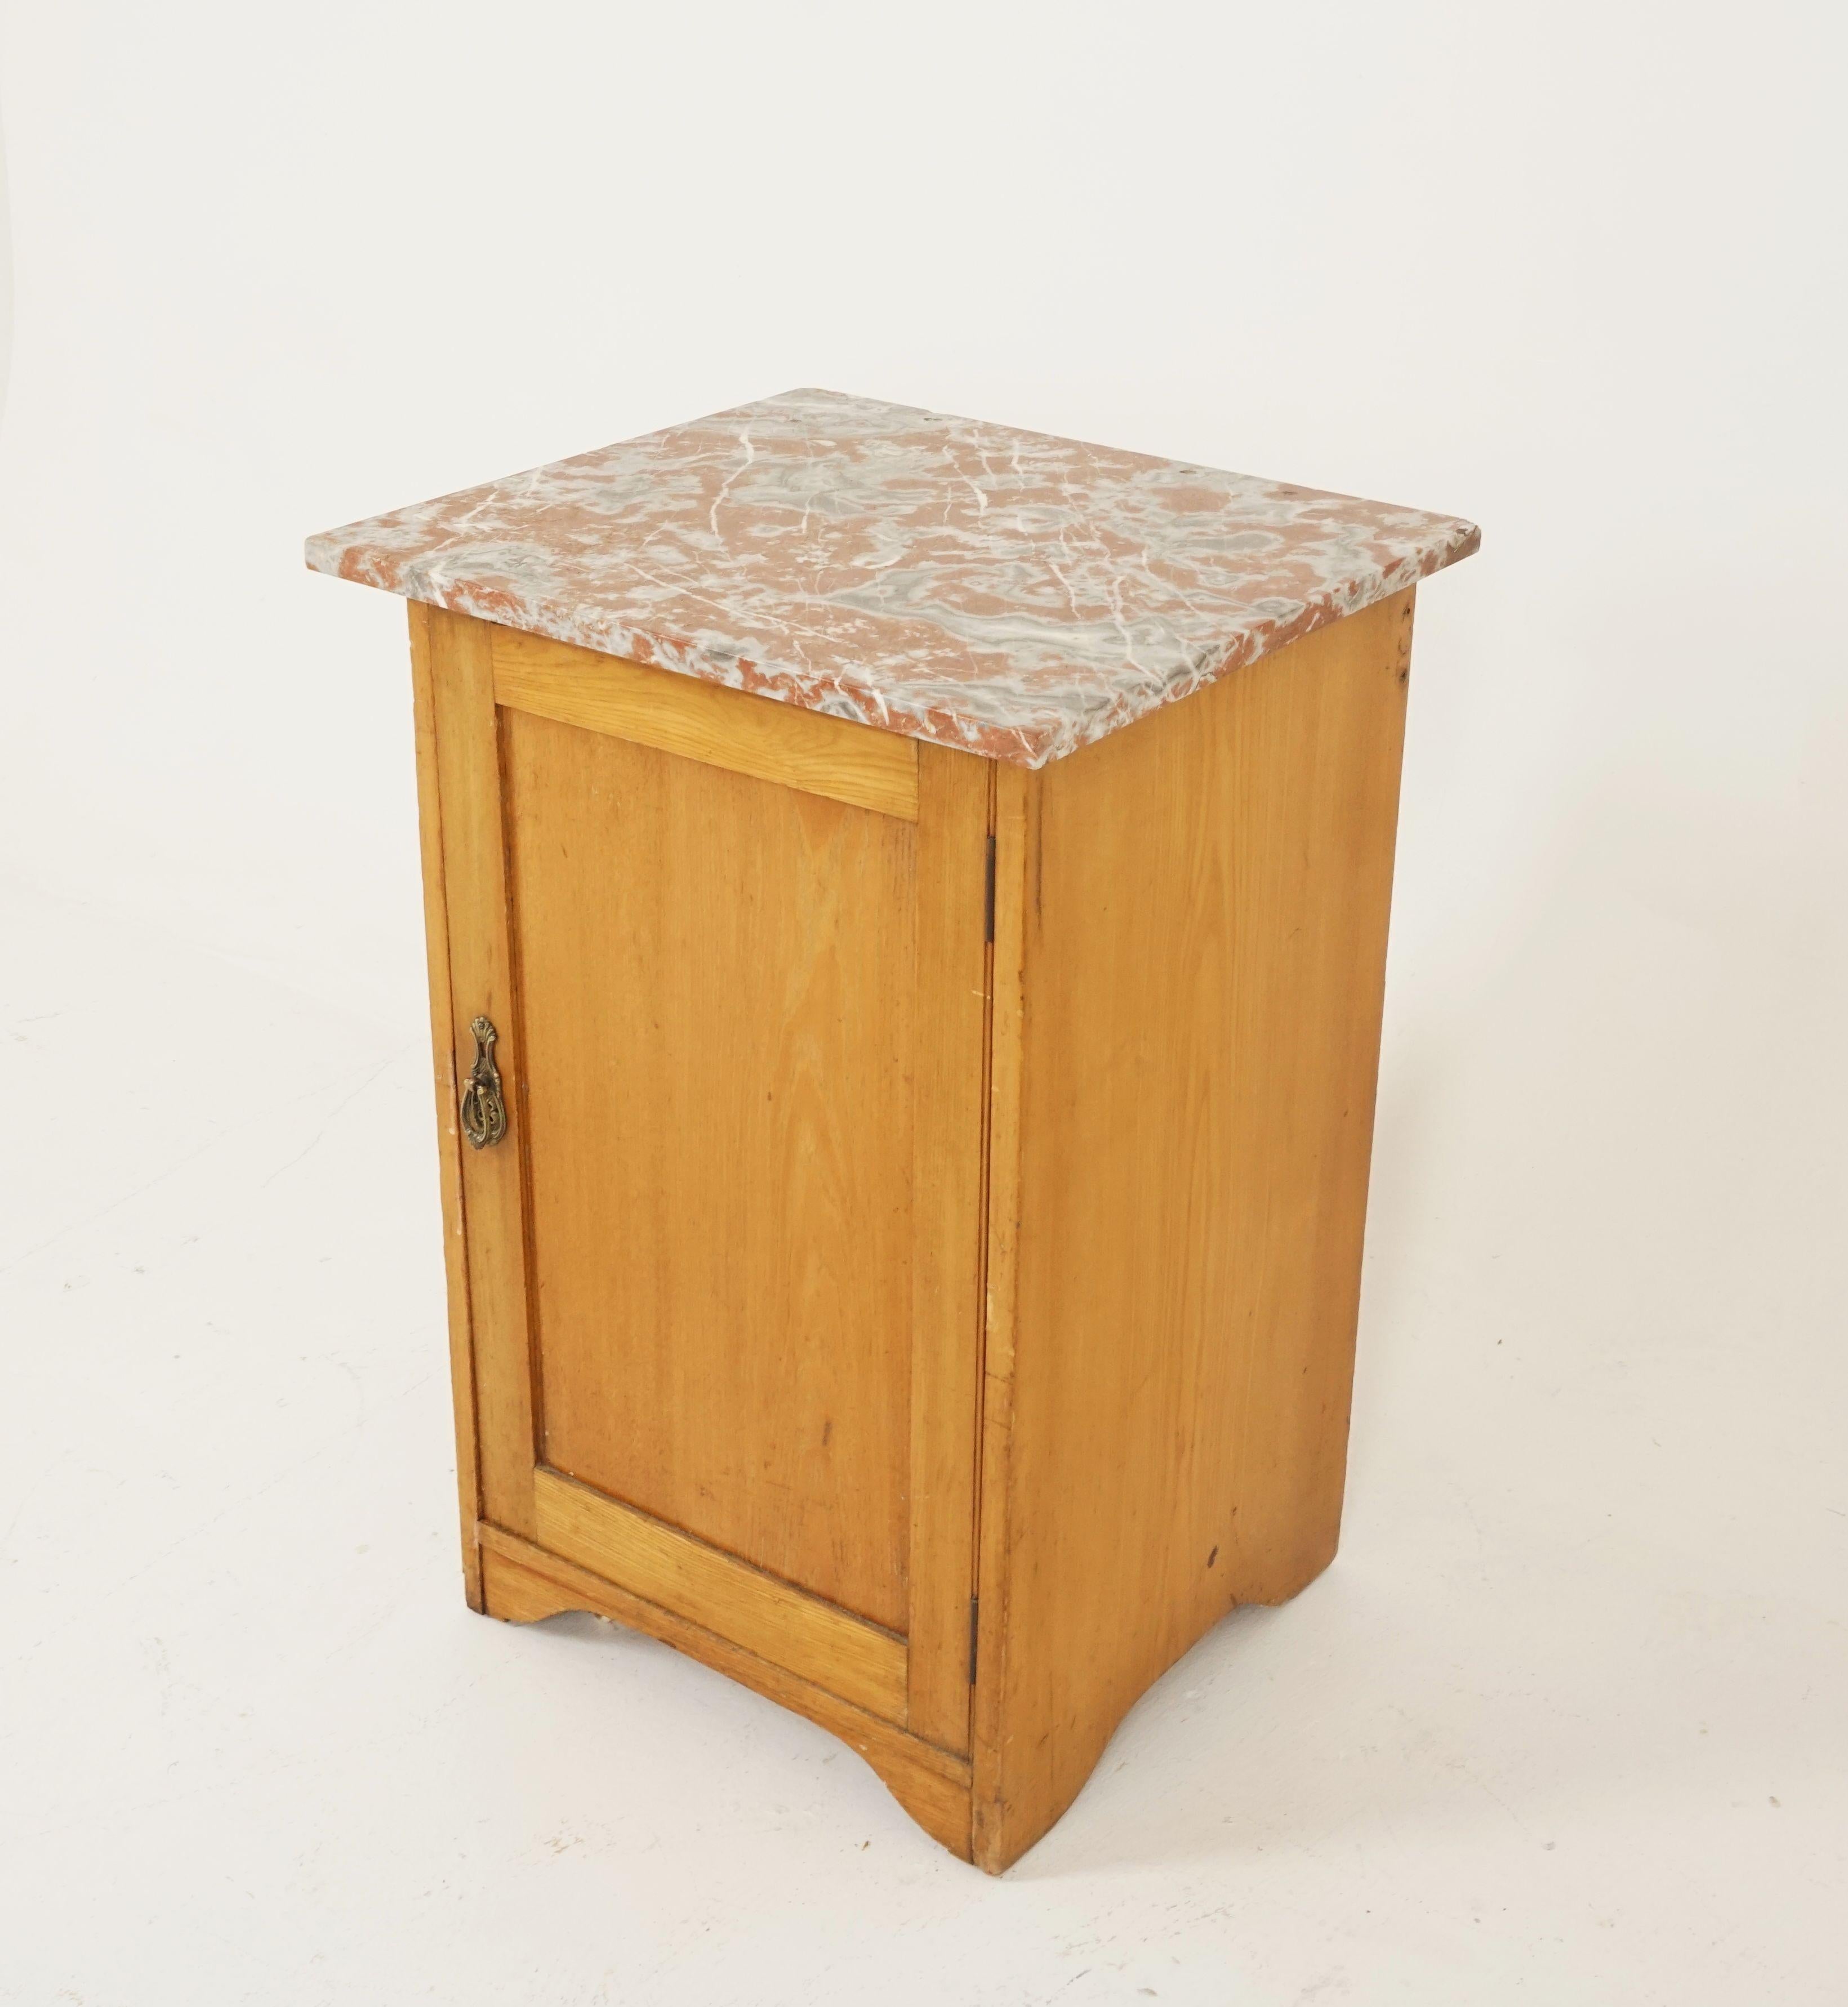 Antique ash nightstand, marble-top, lamp table, Scotland, 1900

Scotland, 1900
Solid oak
Original finish
Rouge marble top
Single door underneath opens to reveal single ash shelf
Original brass hardware
All standing on a plinth base
With